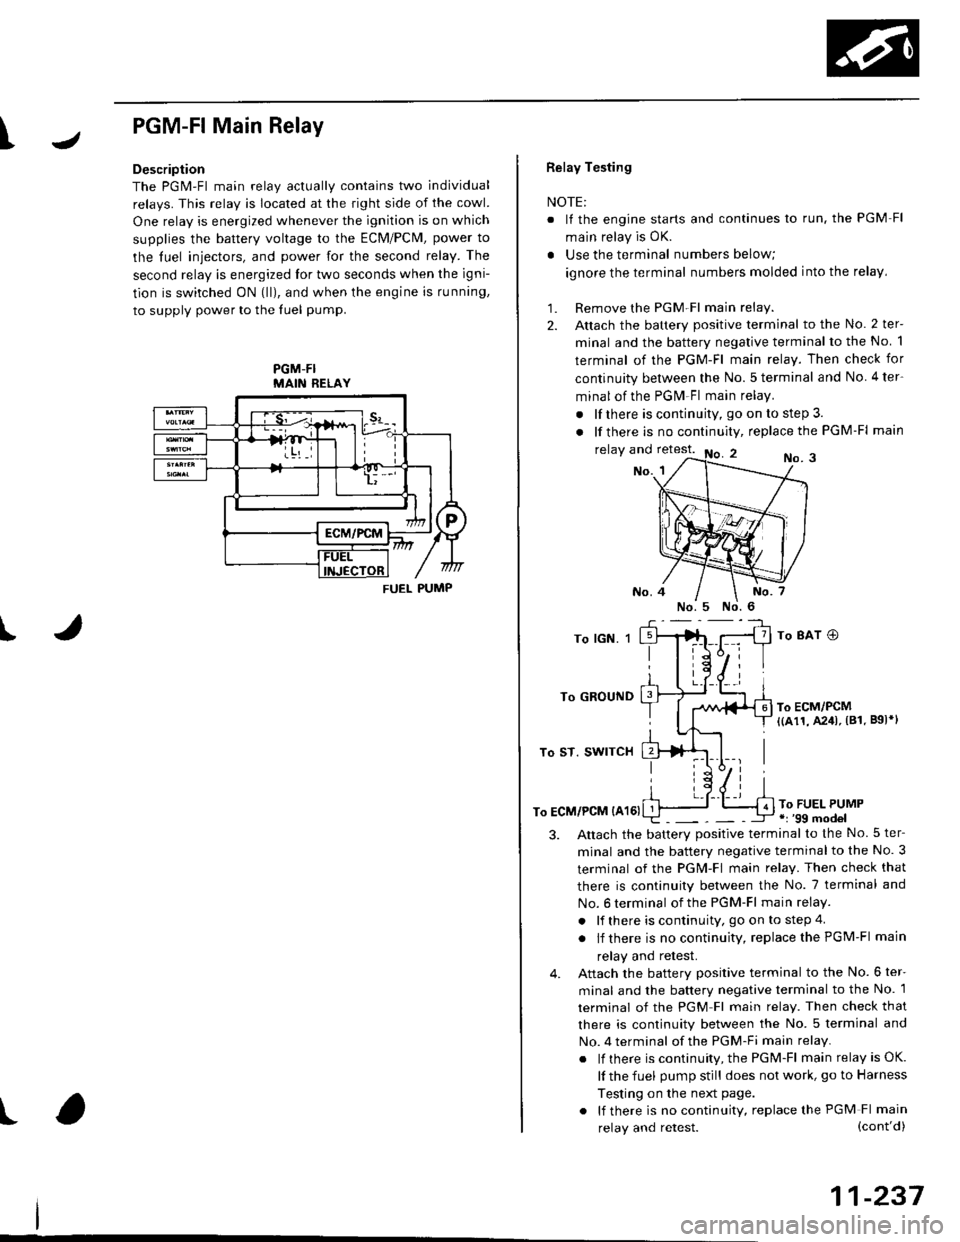 HONDA CIVIC 1996 6.G Workshop Manual I
PGM-FlMain Relay
Description
The PGM-Fl main relav actuallv contains two individual
relays. This relay is located at the right side of the cowl.
One relay is energized whenever the ignition is on wh